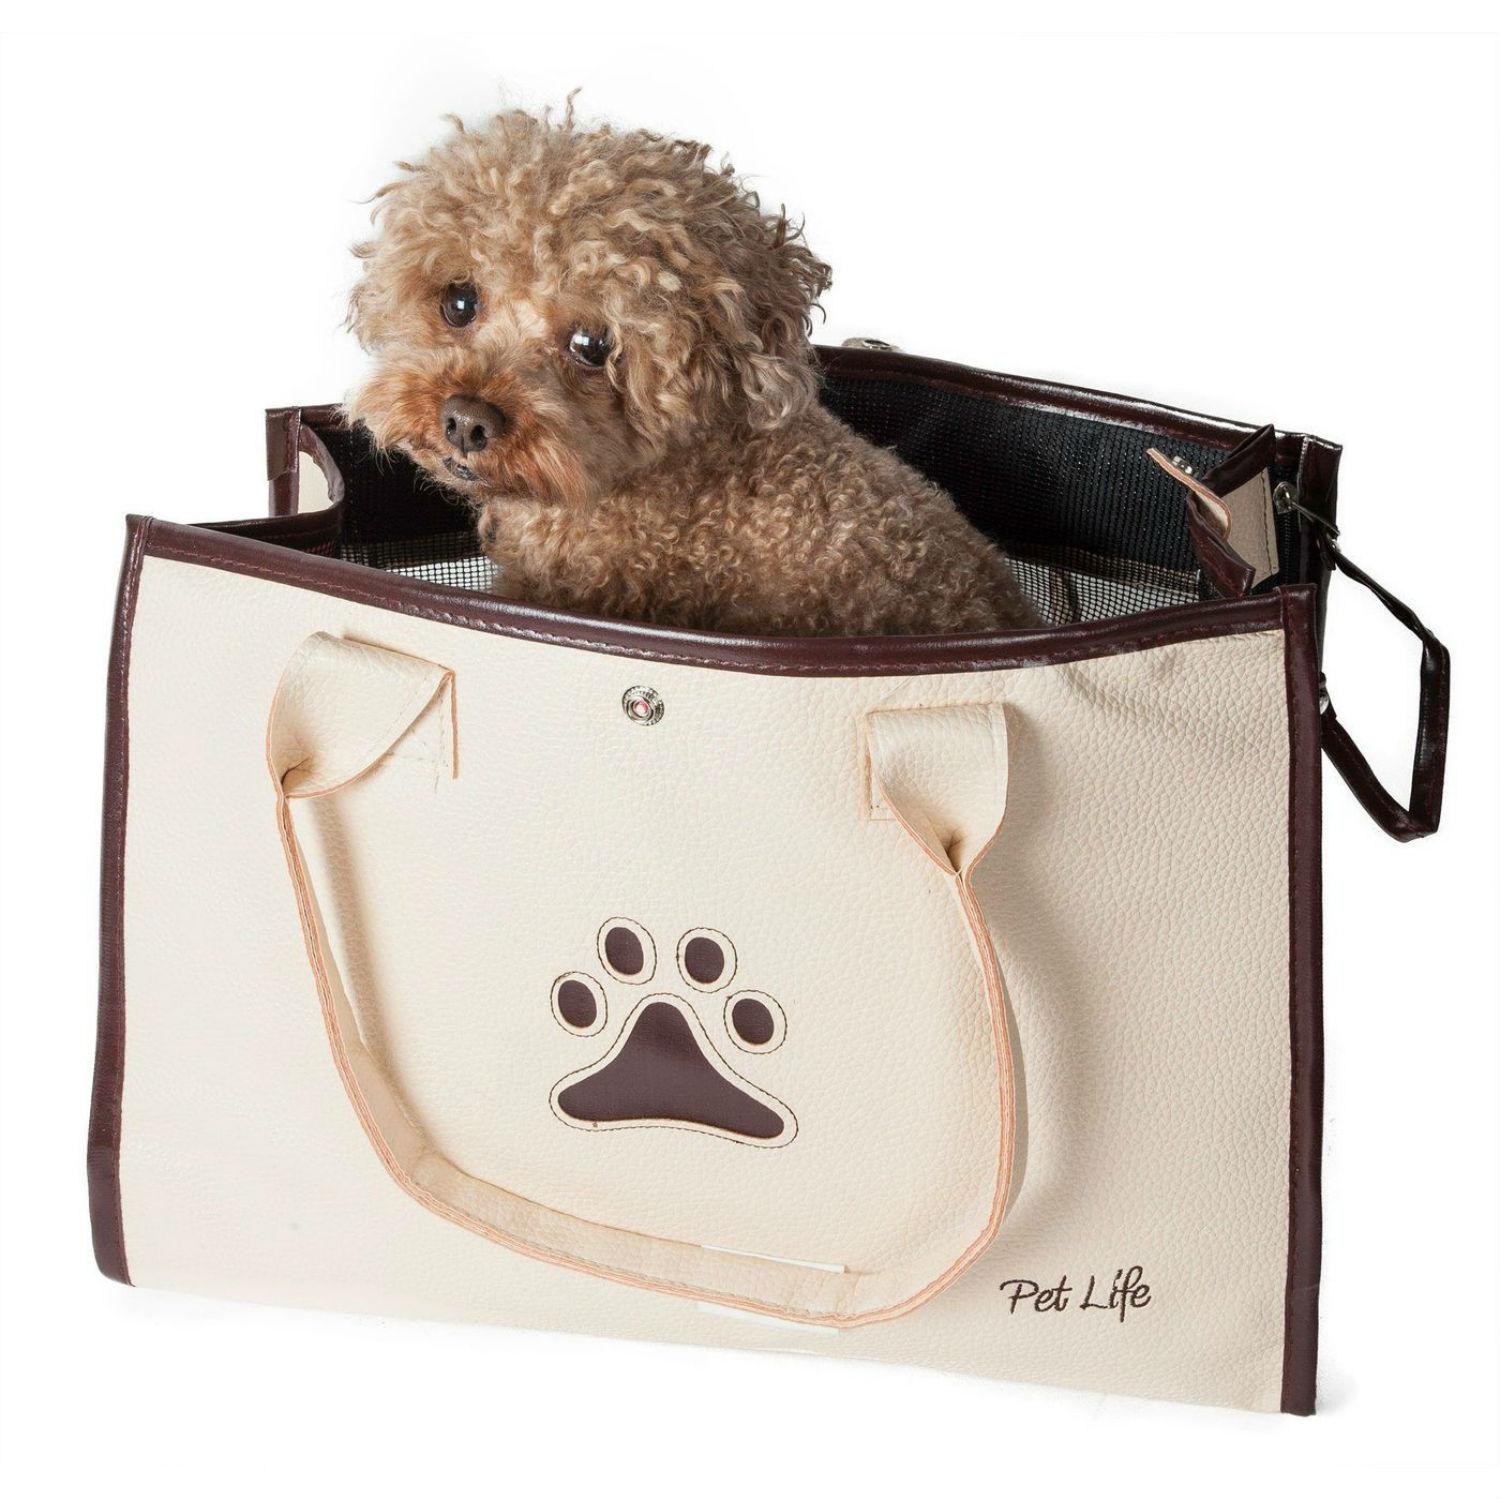 Pet Life Posh Paw Dog Carrier Tote - White & Brown